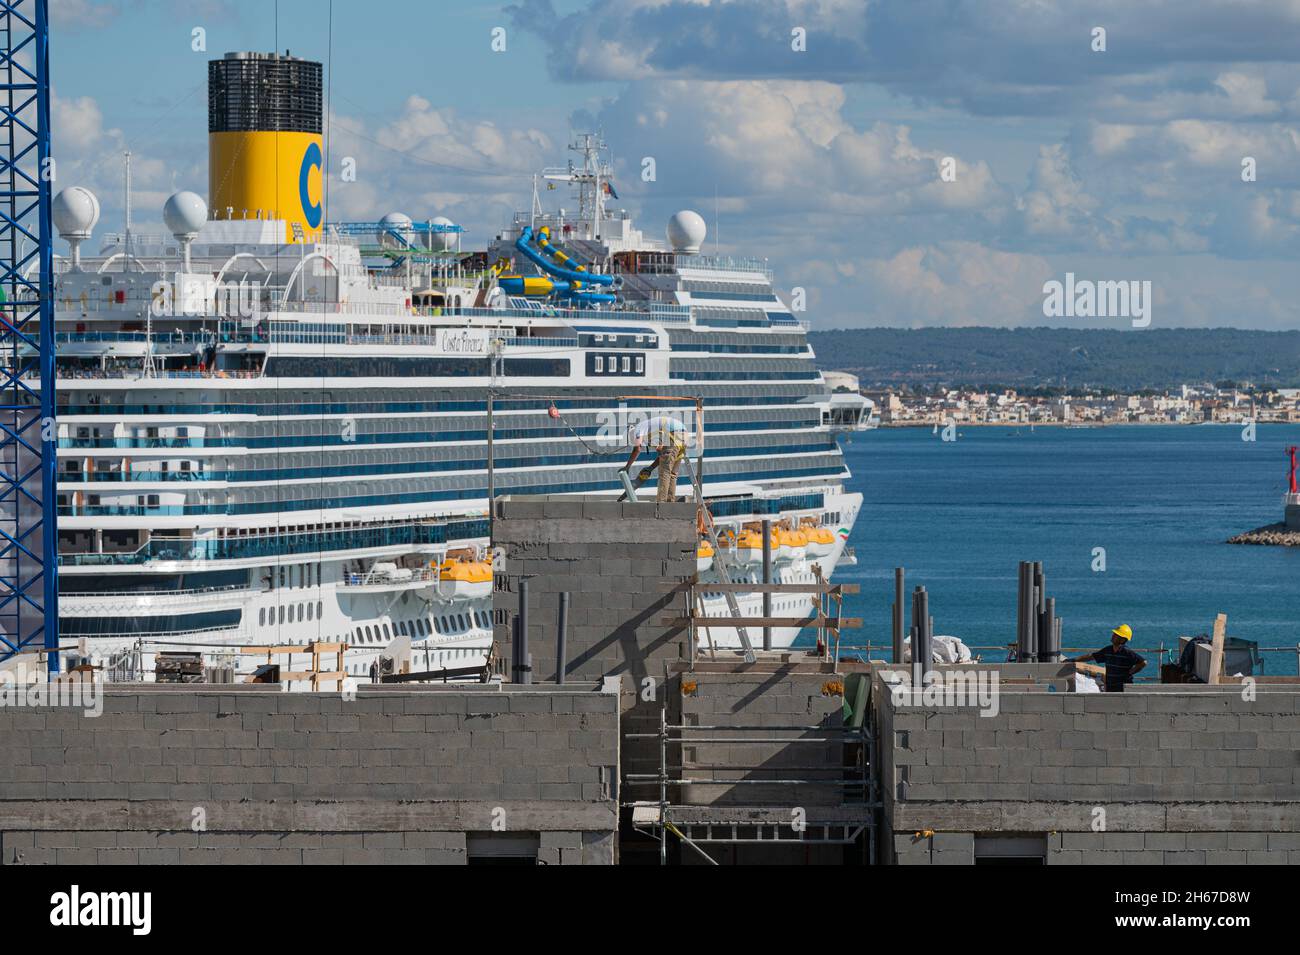 Palma de Mallorca, Balearic Islands, Spain - 11 04 2021: Residential building under construction in Palma port with a cruise ship on the background Stock Photo